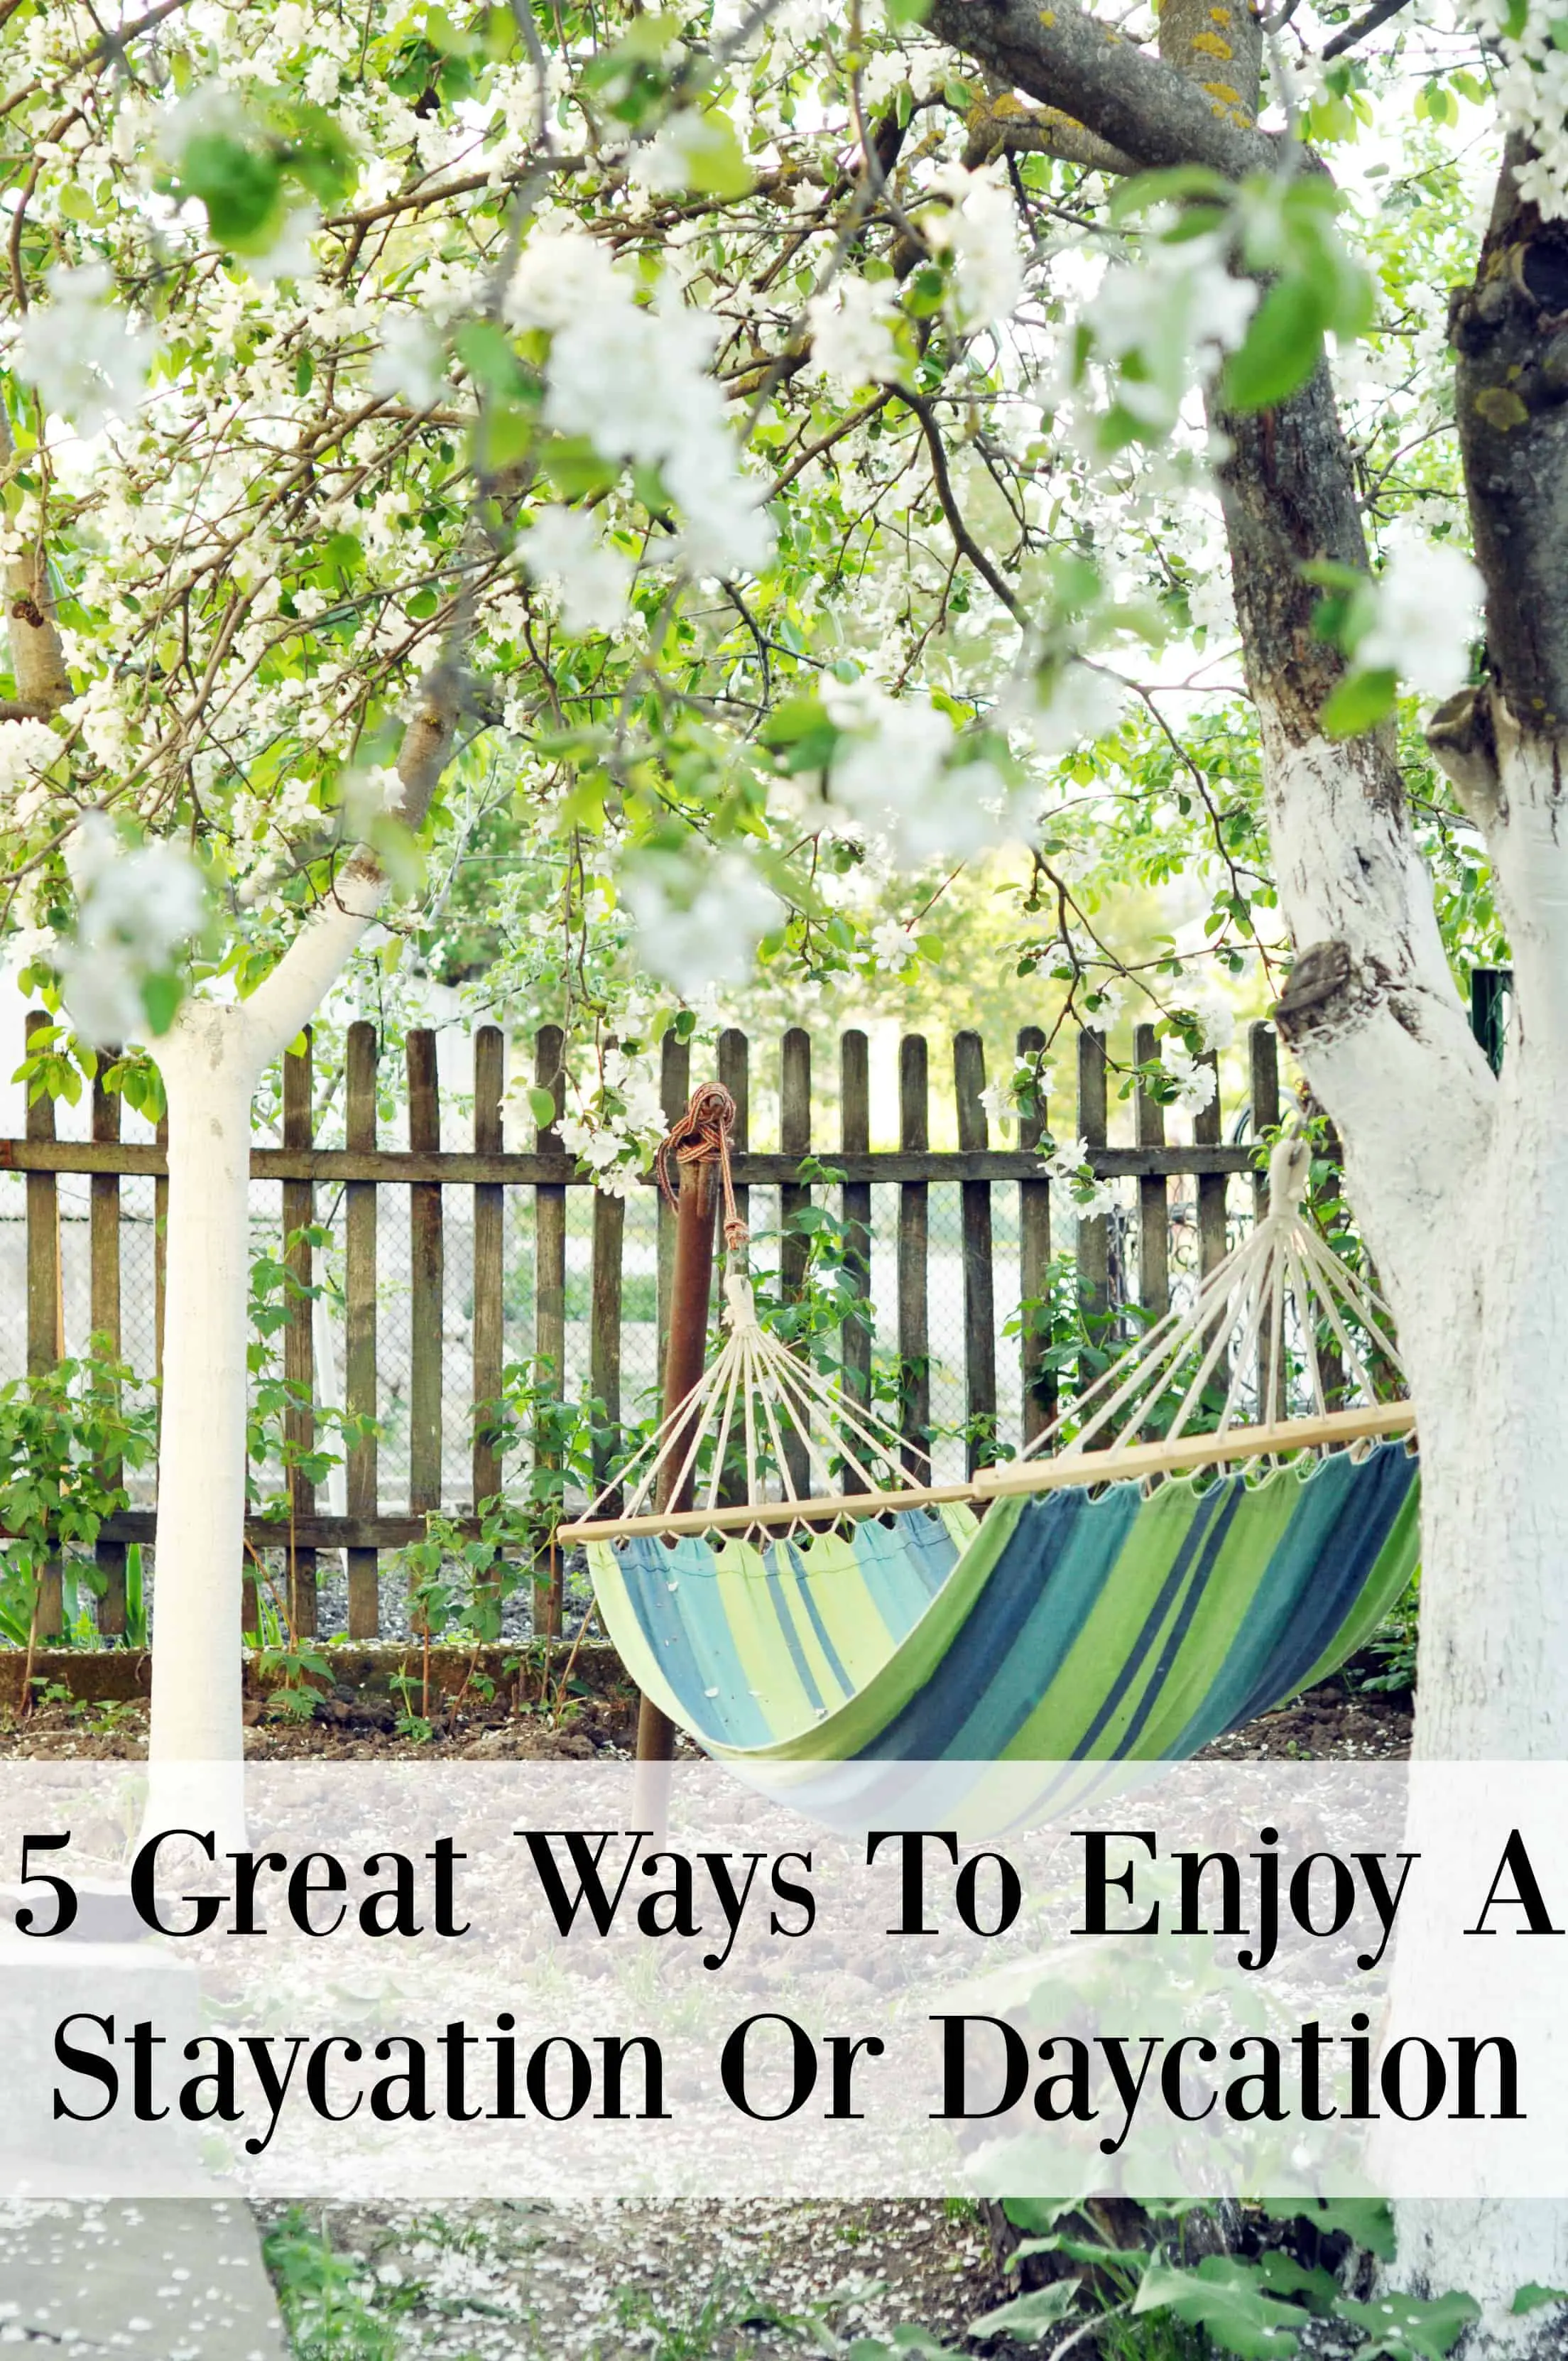 5 Great Ways to Enjoy a Staycation or Daycation - don't break the bank or your budget this year by trying to pay for a huge vacation! Instead, take a staycation!